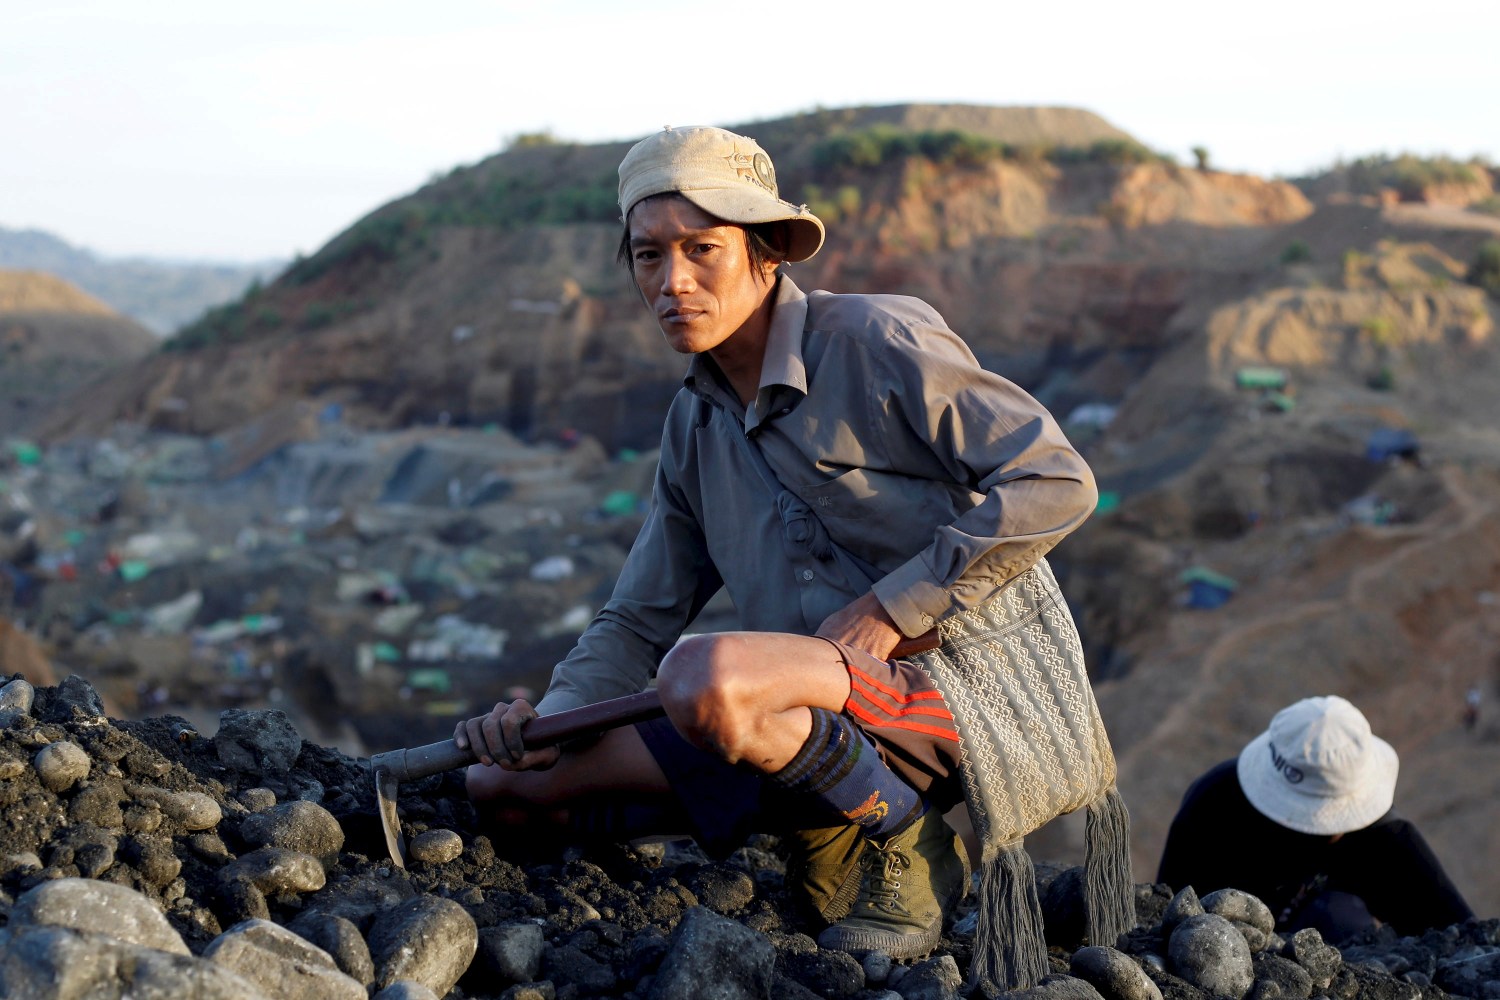 DATE IMPORTED:November 27, 2015A miner sits in a mine as he searches for jade stones at Hpakant jade mine in Kachin state, Myanmar, November 27, 2015. REUTERS/Soe Zeya Tun